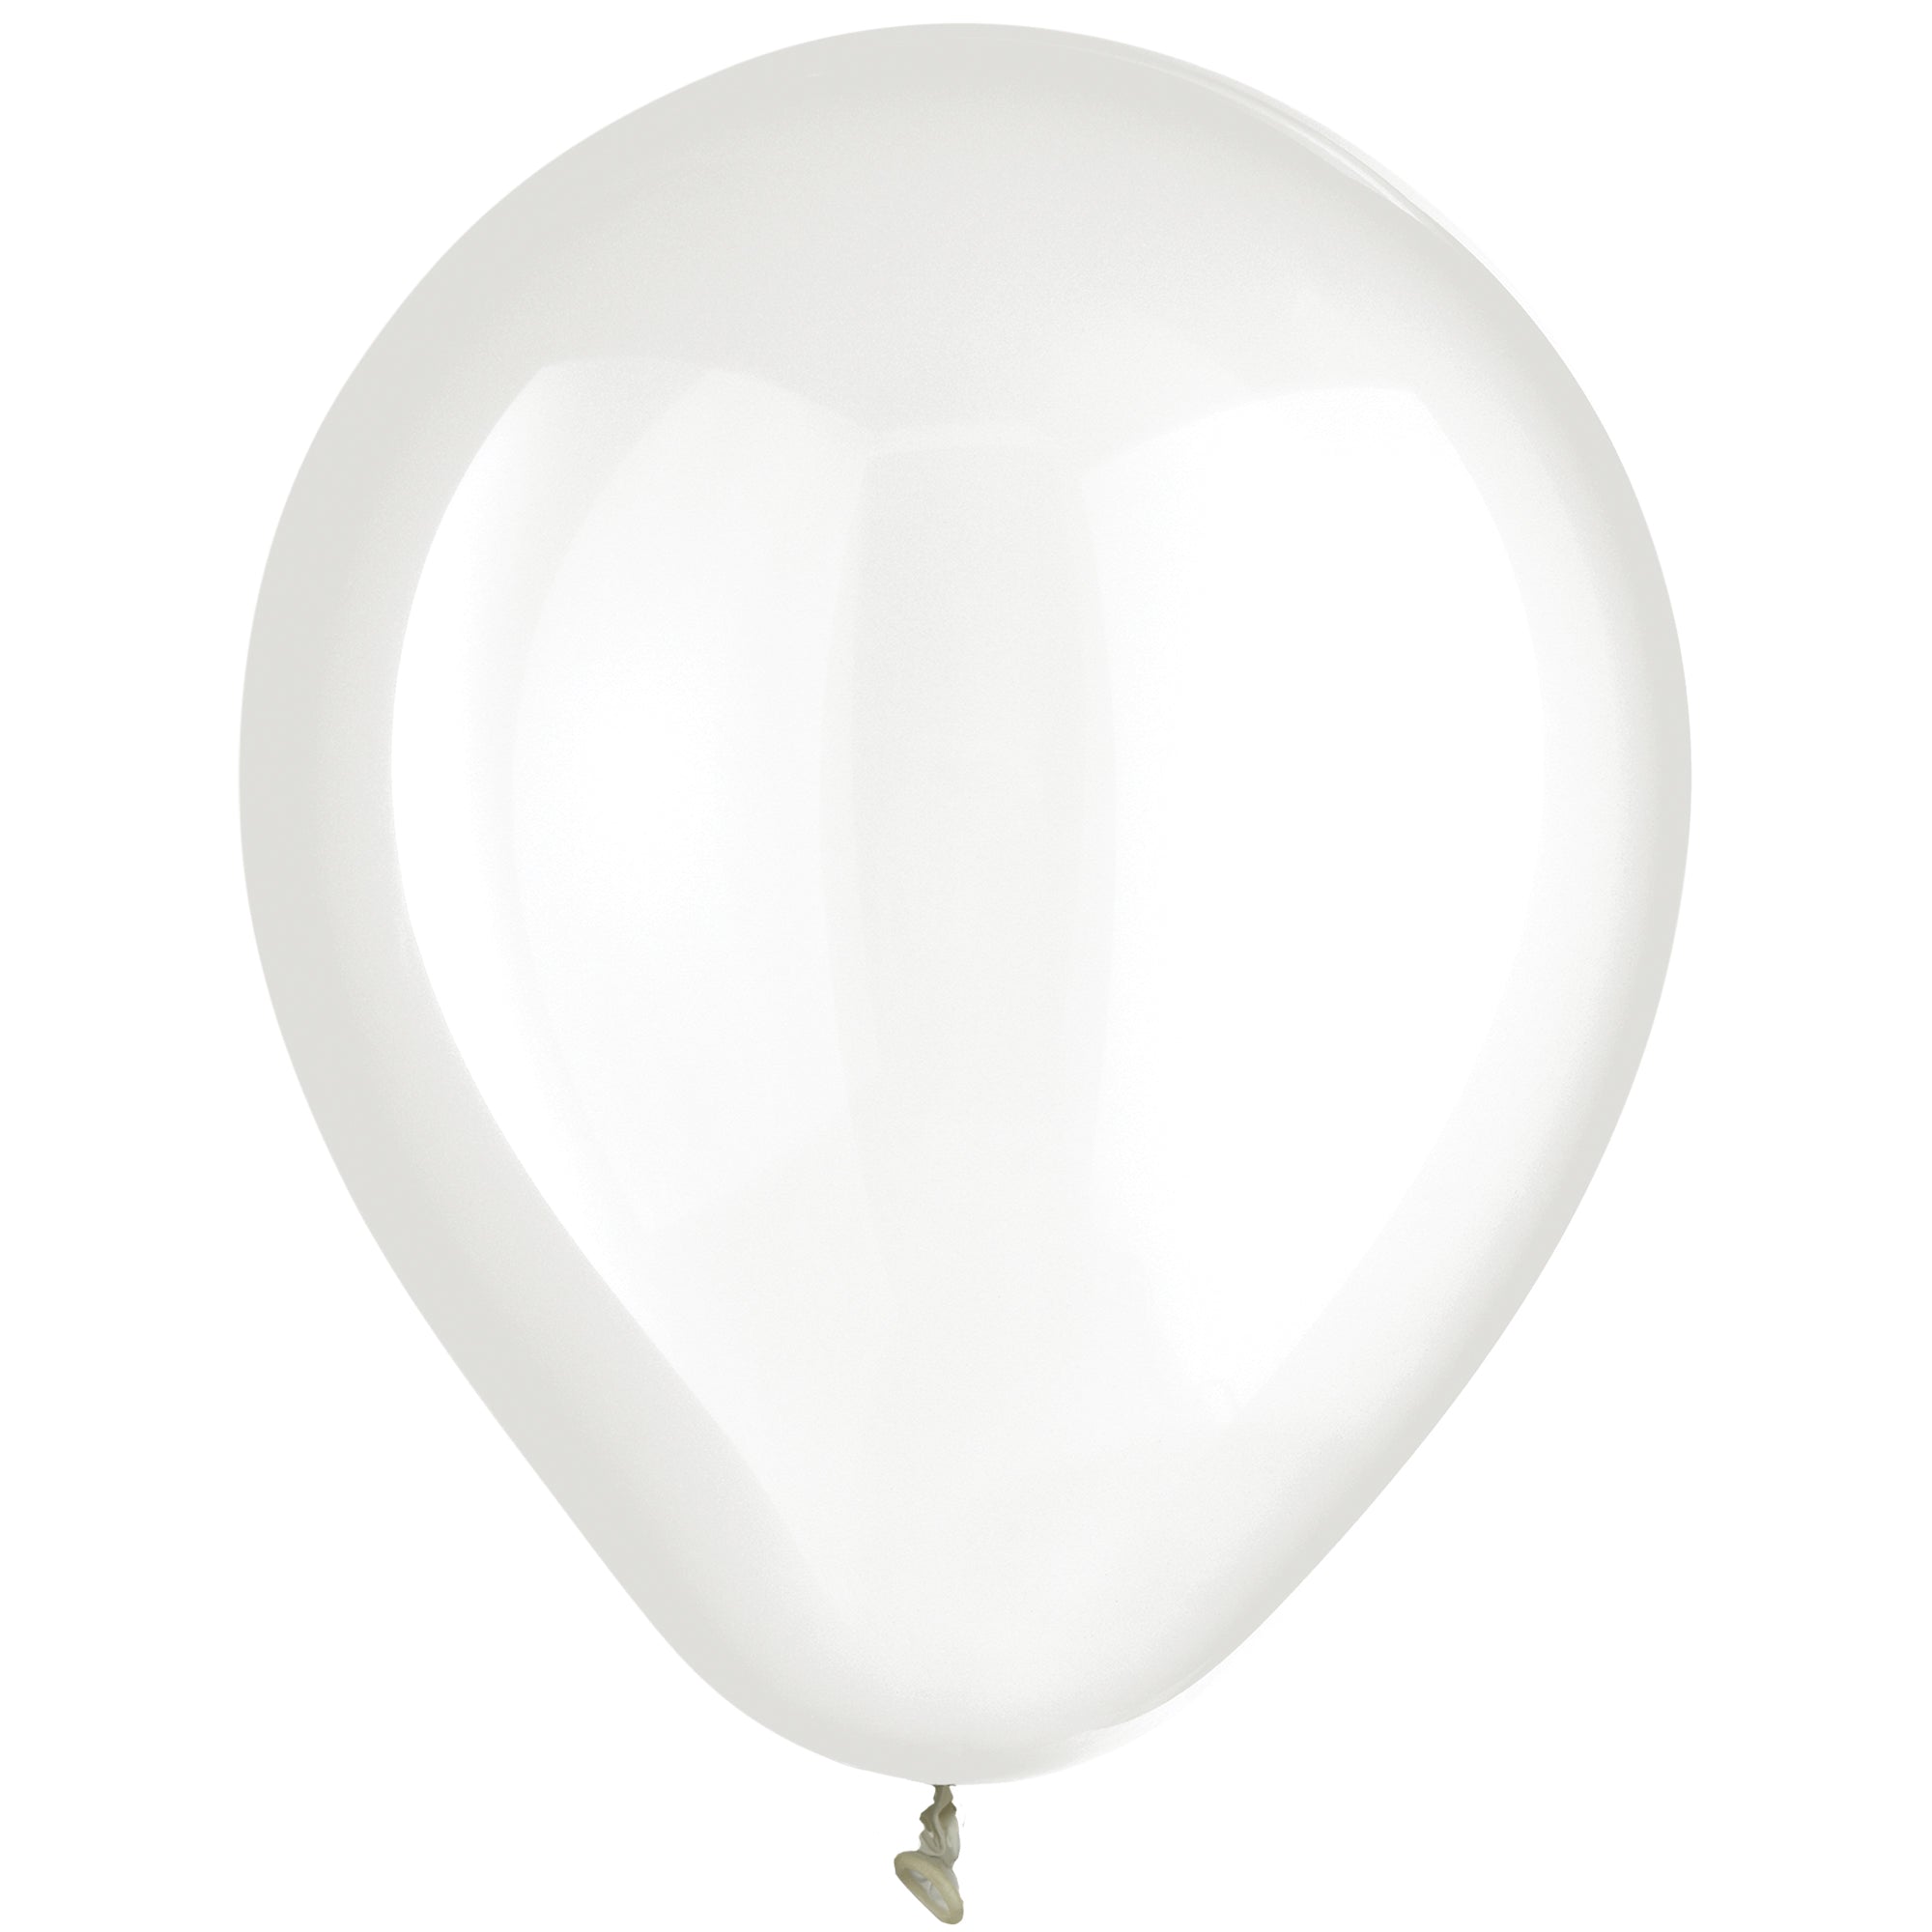 Clear 12" helium quality 15 count Latex Balloons